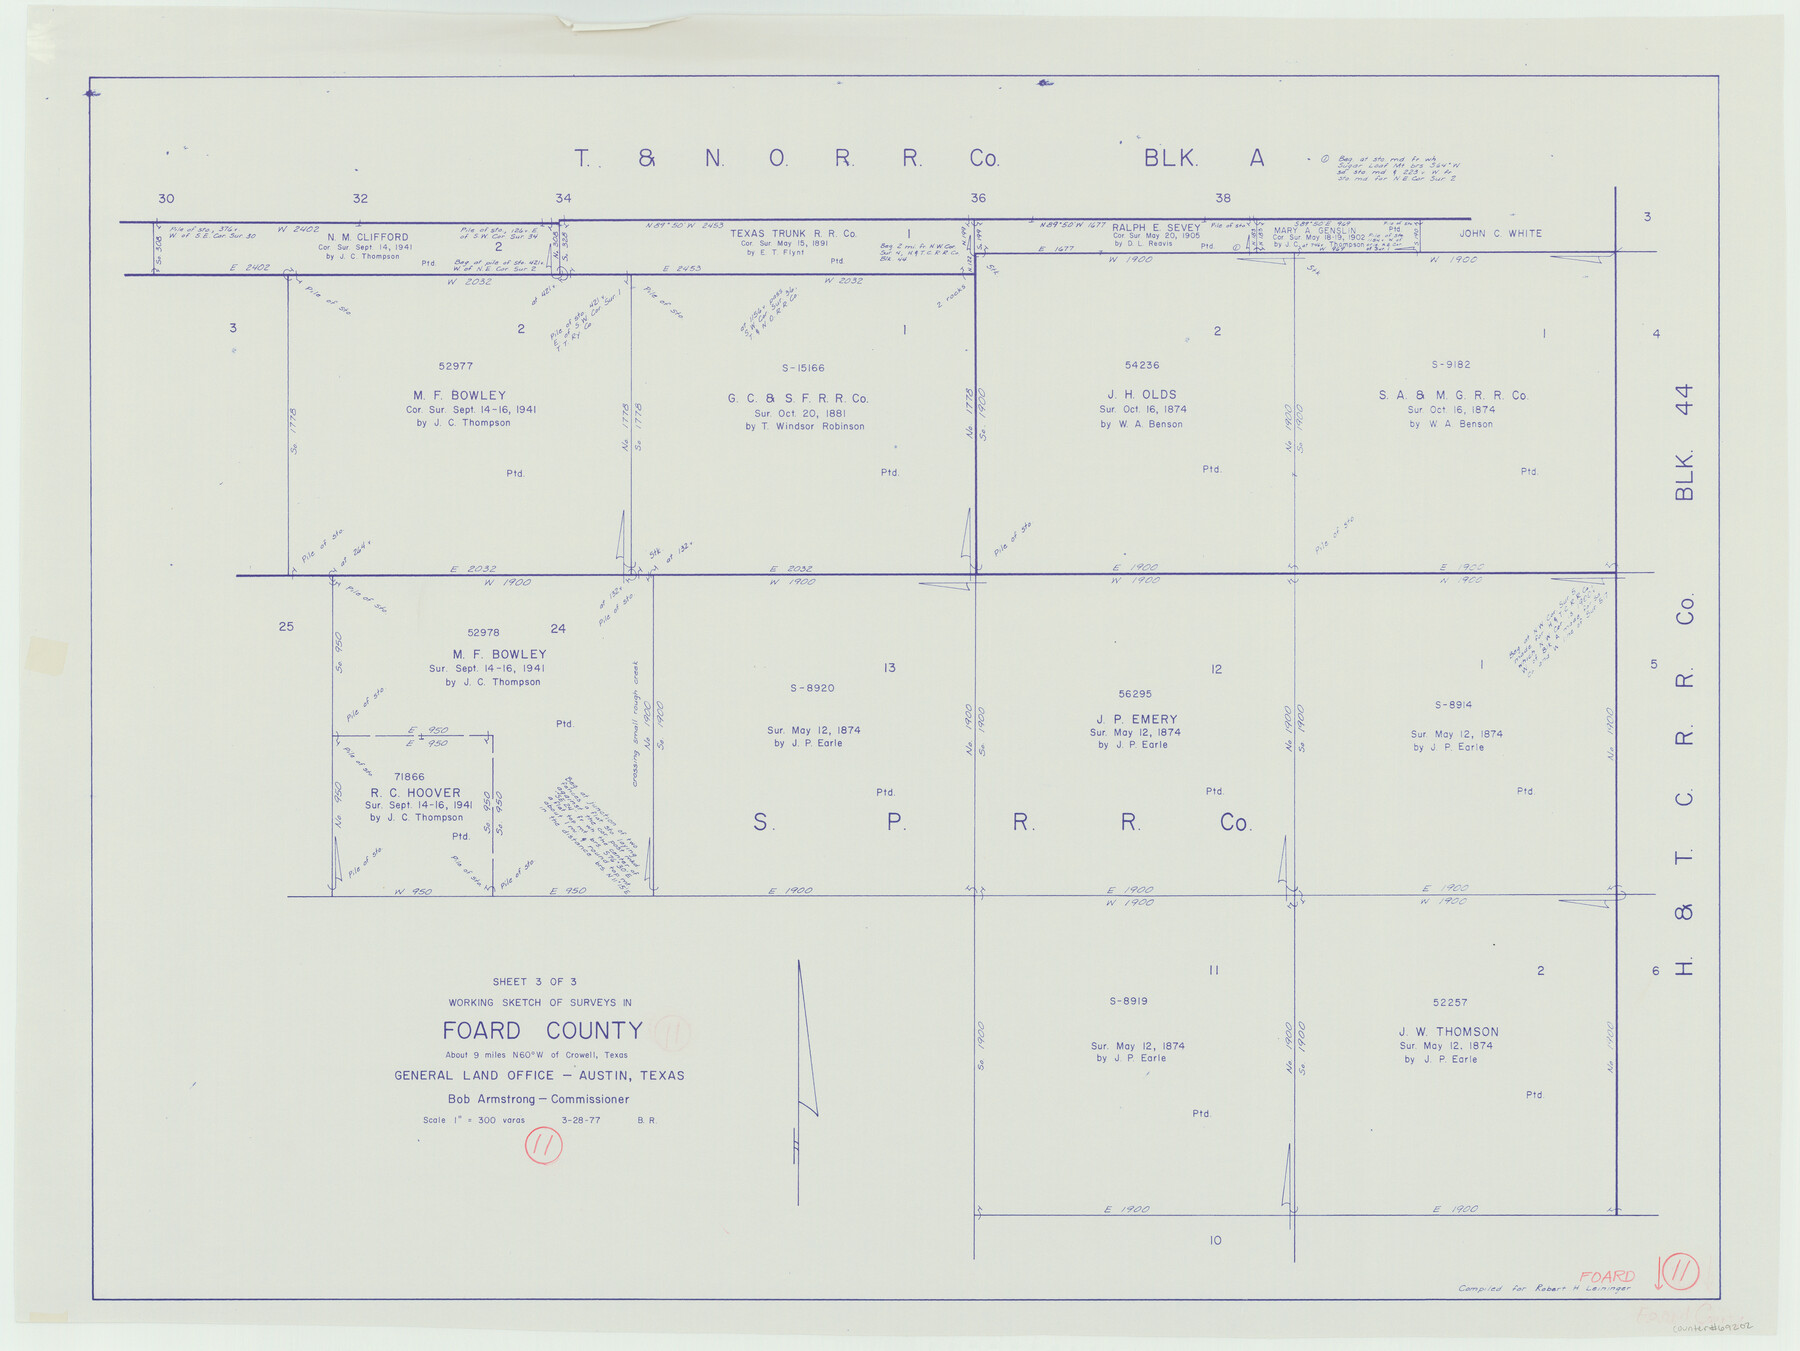 69202, Foard County Working Sketch 11, General Map Collection